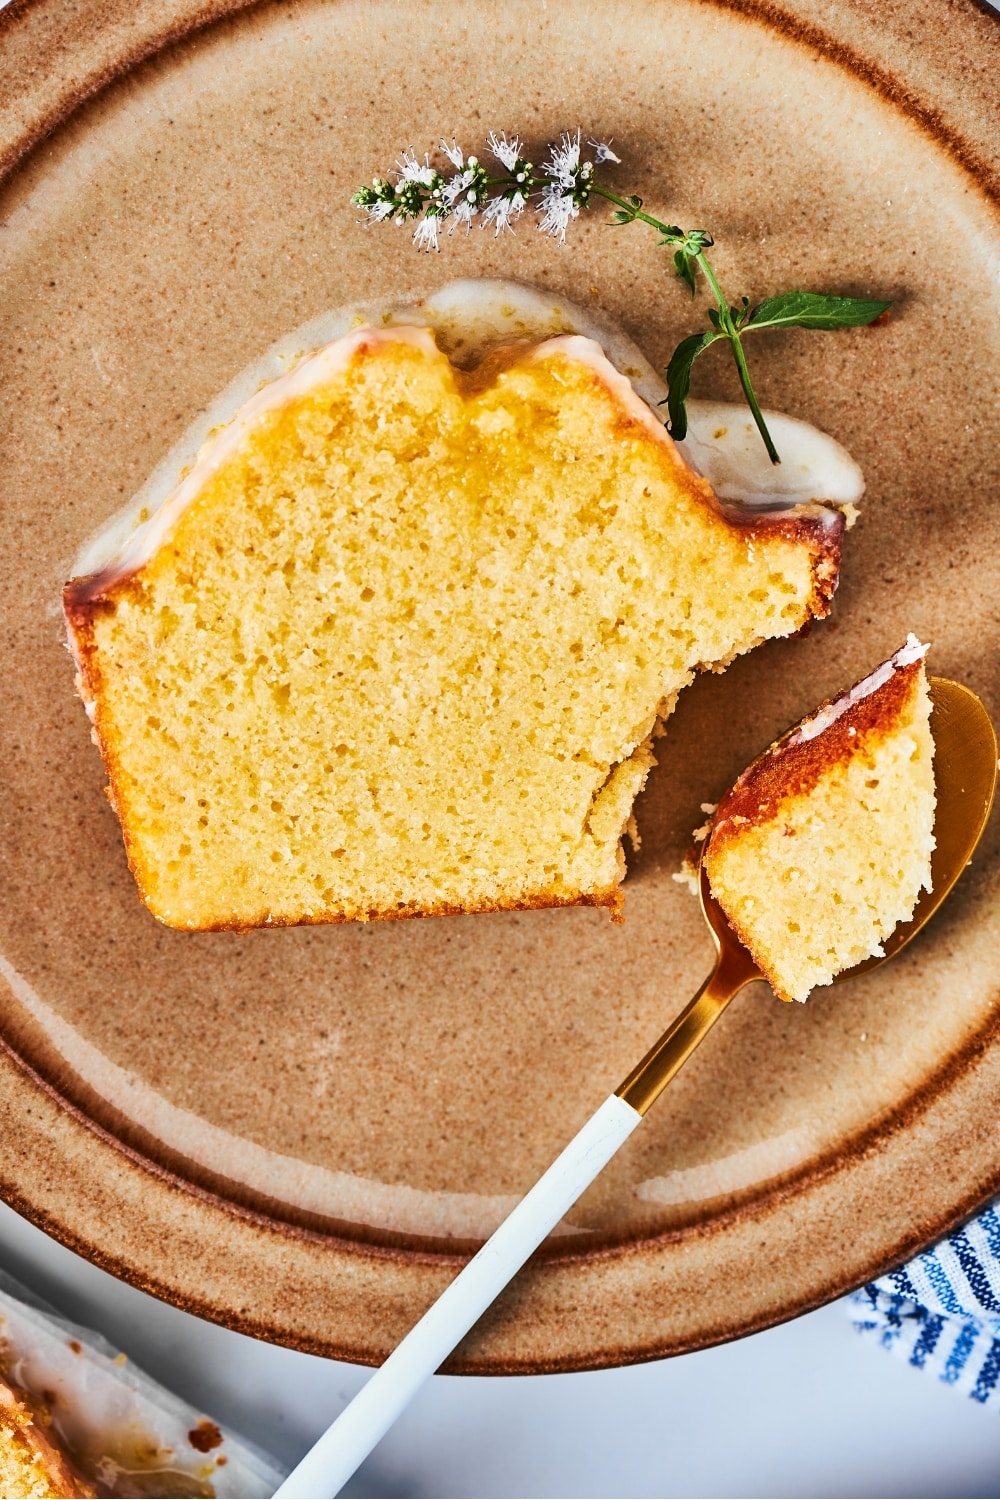 Thick slice of pound cake lying flat on a brown plate. There is a spoon on the plate with a piece of the bottom right corner of the poundcake on it.